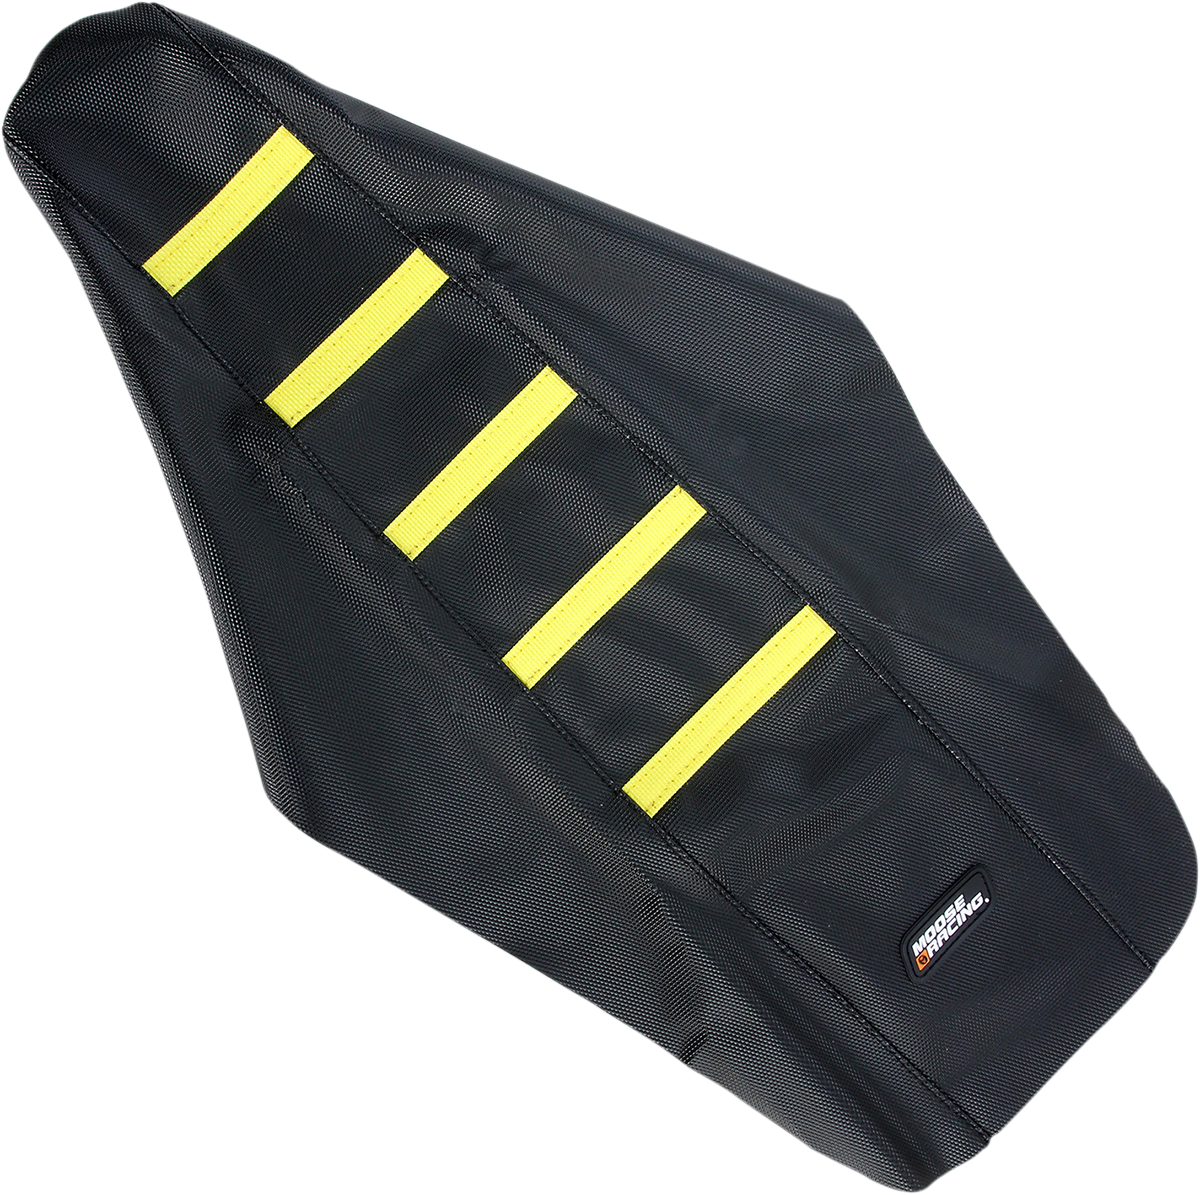 MOOSE RACING Ribbed Seat Cover - Black Cover/Yellow Ribs - Suzuki RM12501-331RT